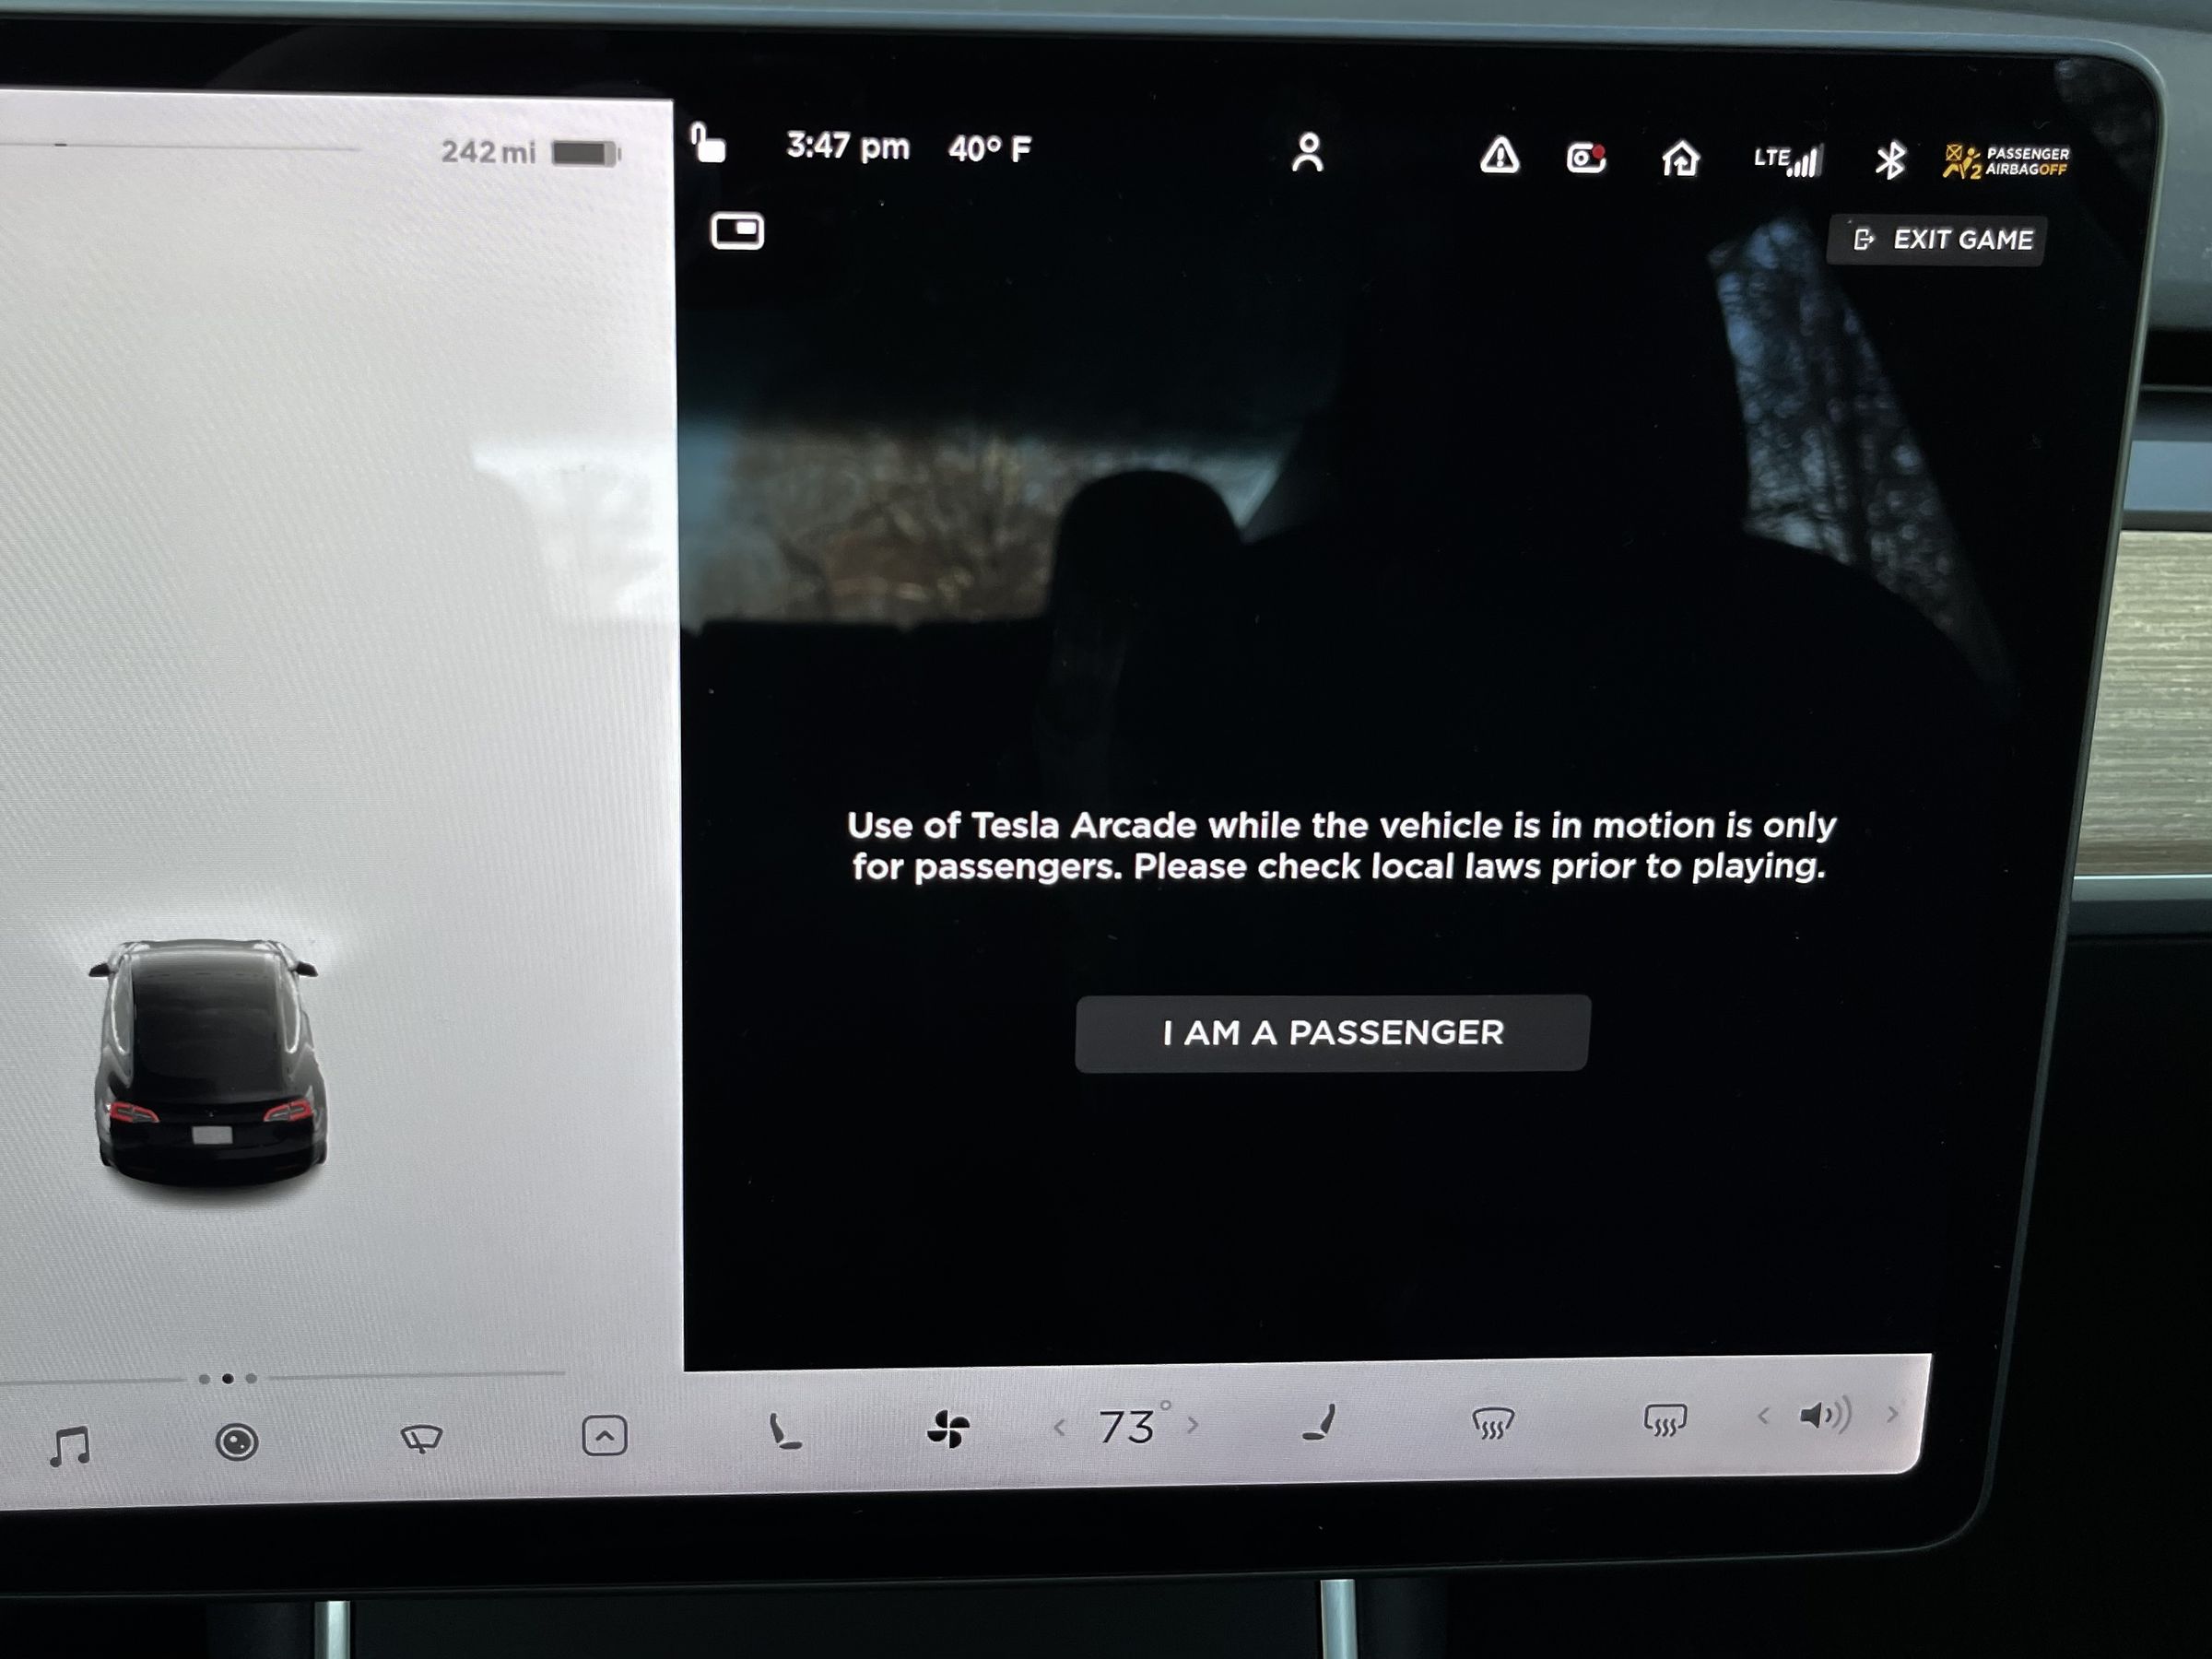 The Tesla center screen is displaying the warning prompt on a black background to confirm you are a passenger, allowing you to tap a button to continue the game.